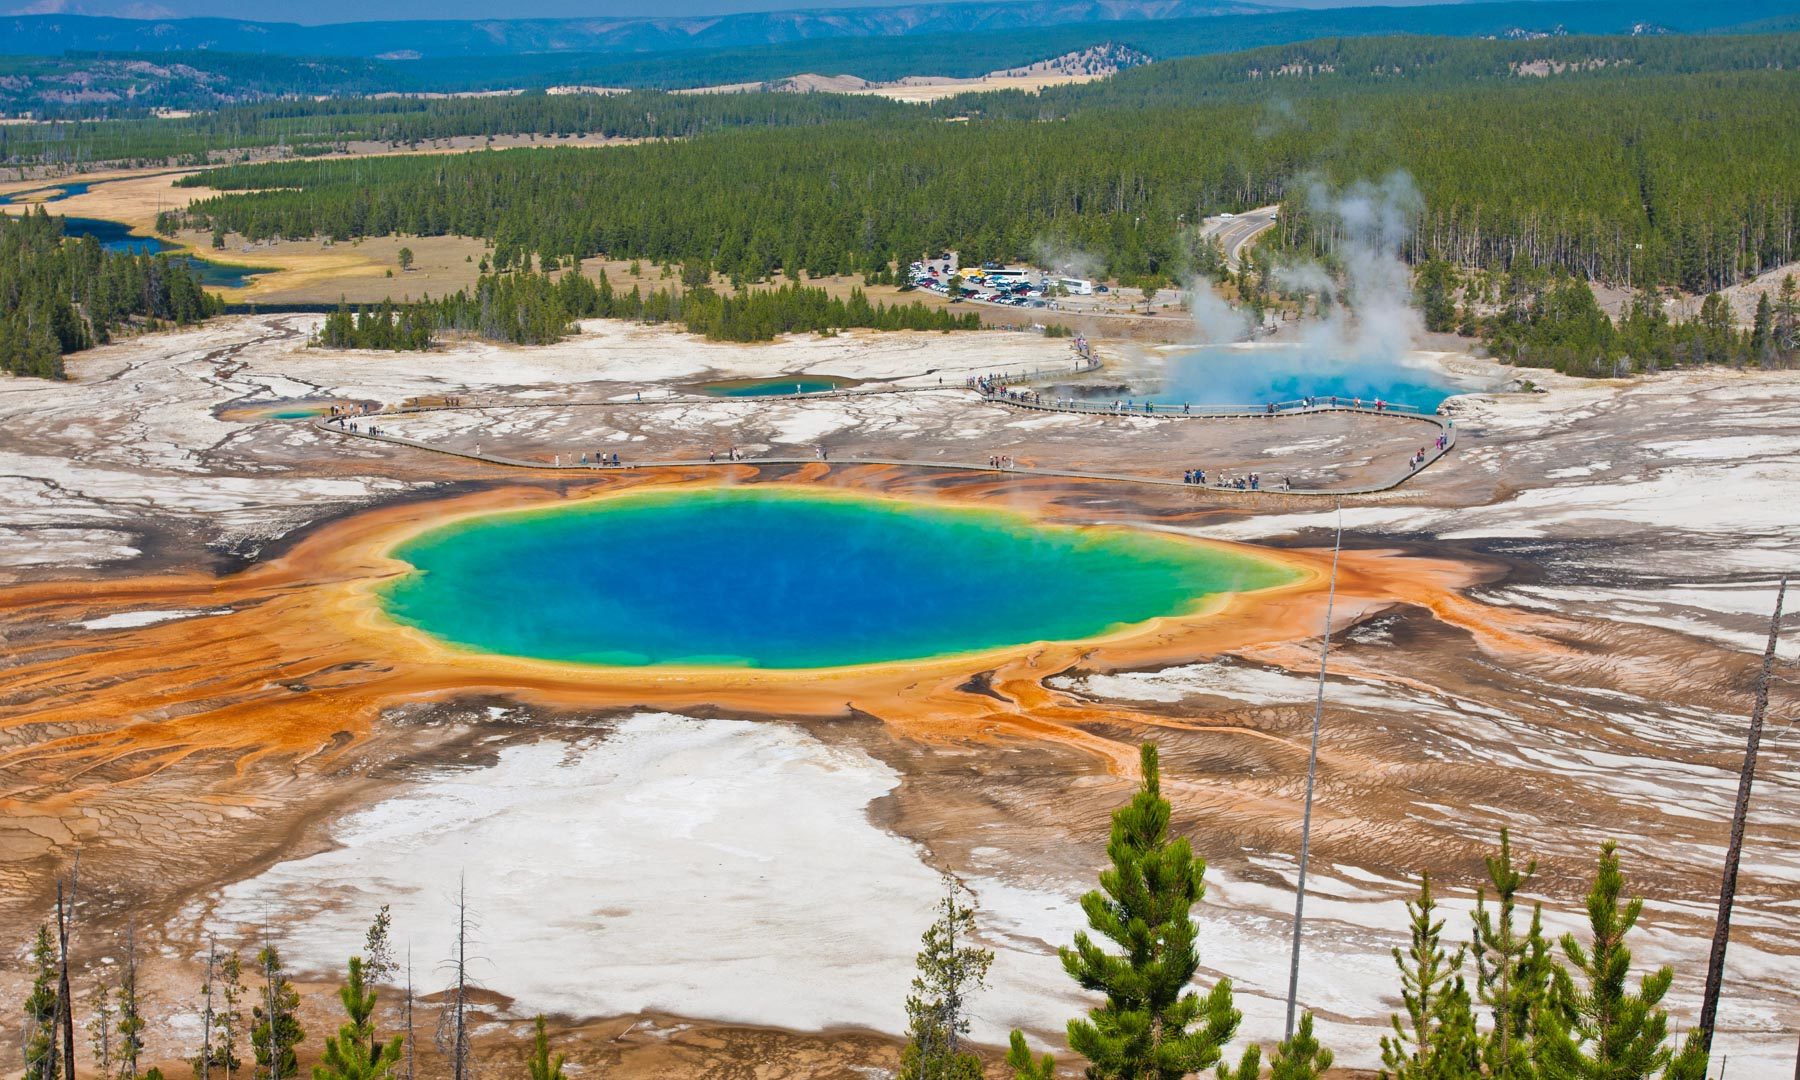 The Best Hotels Near Yellowstone National Park